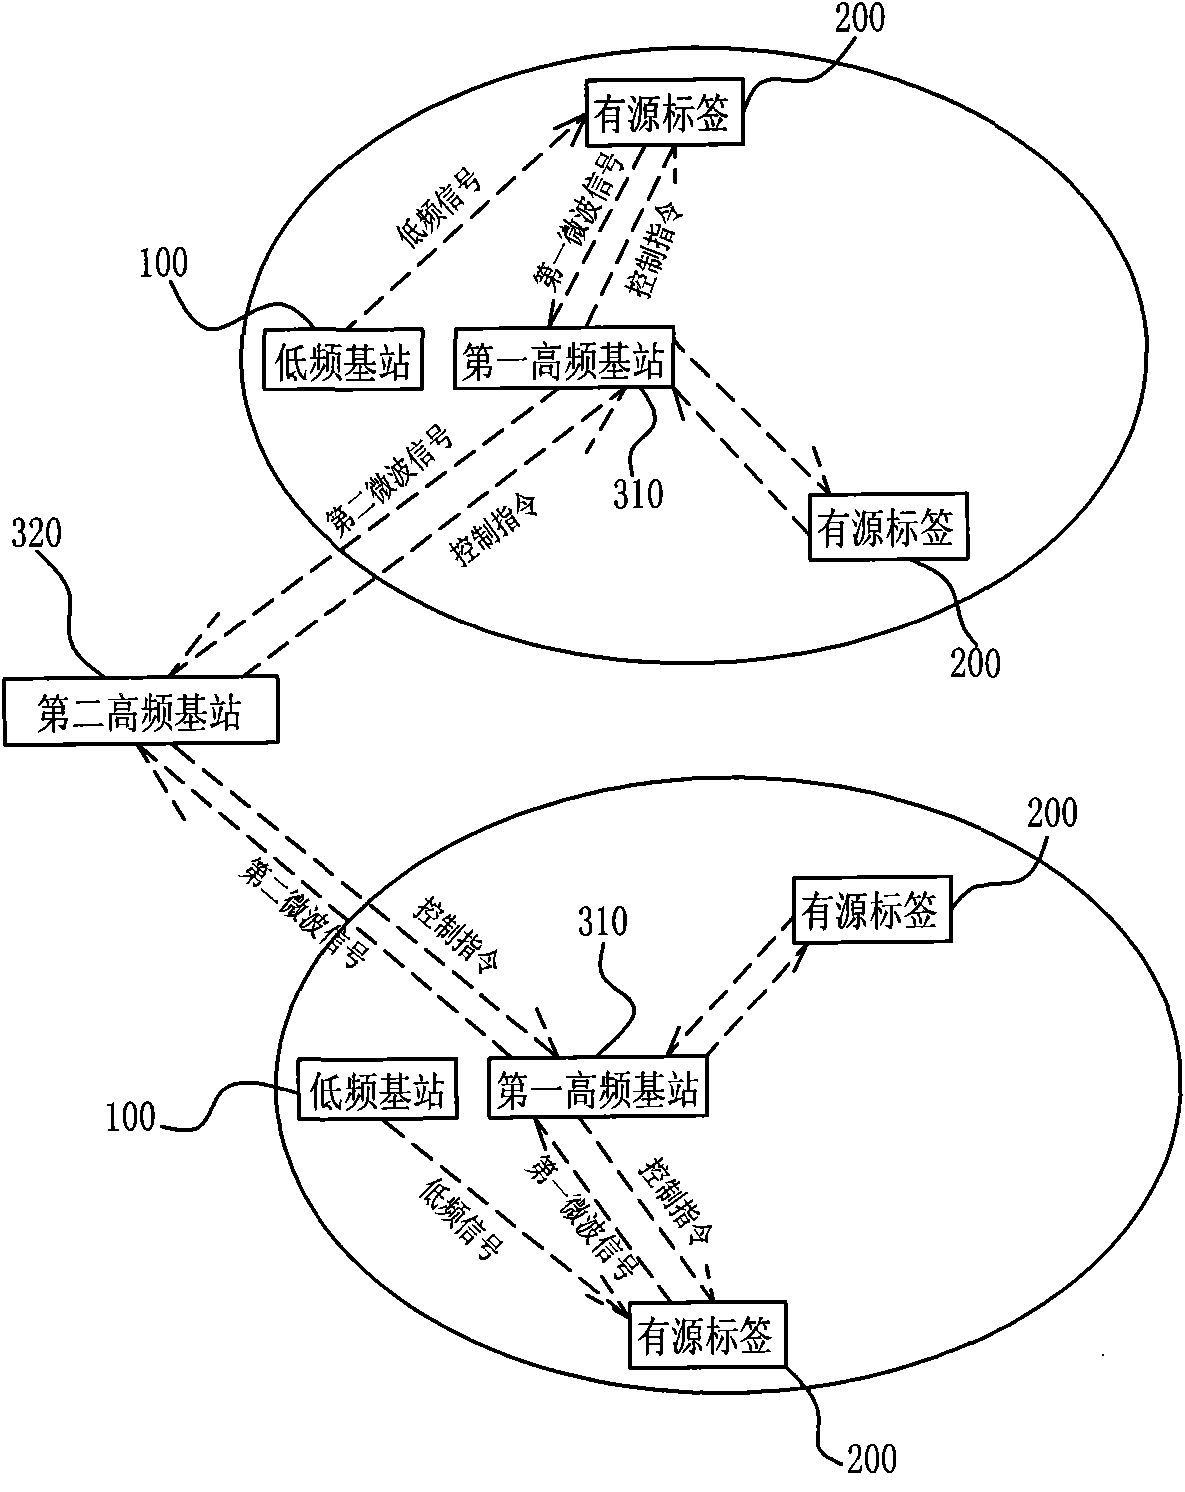 Radio frequency identification method and radio frequency identification system